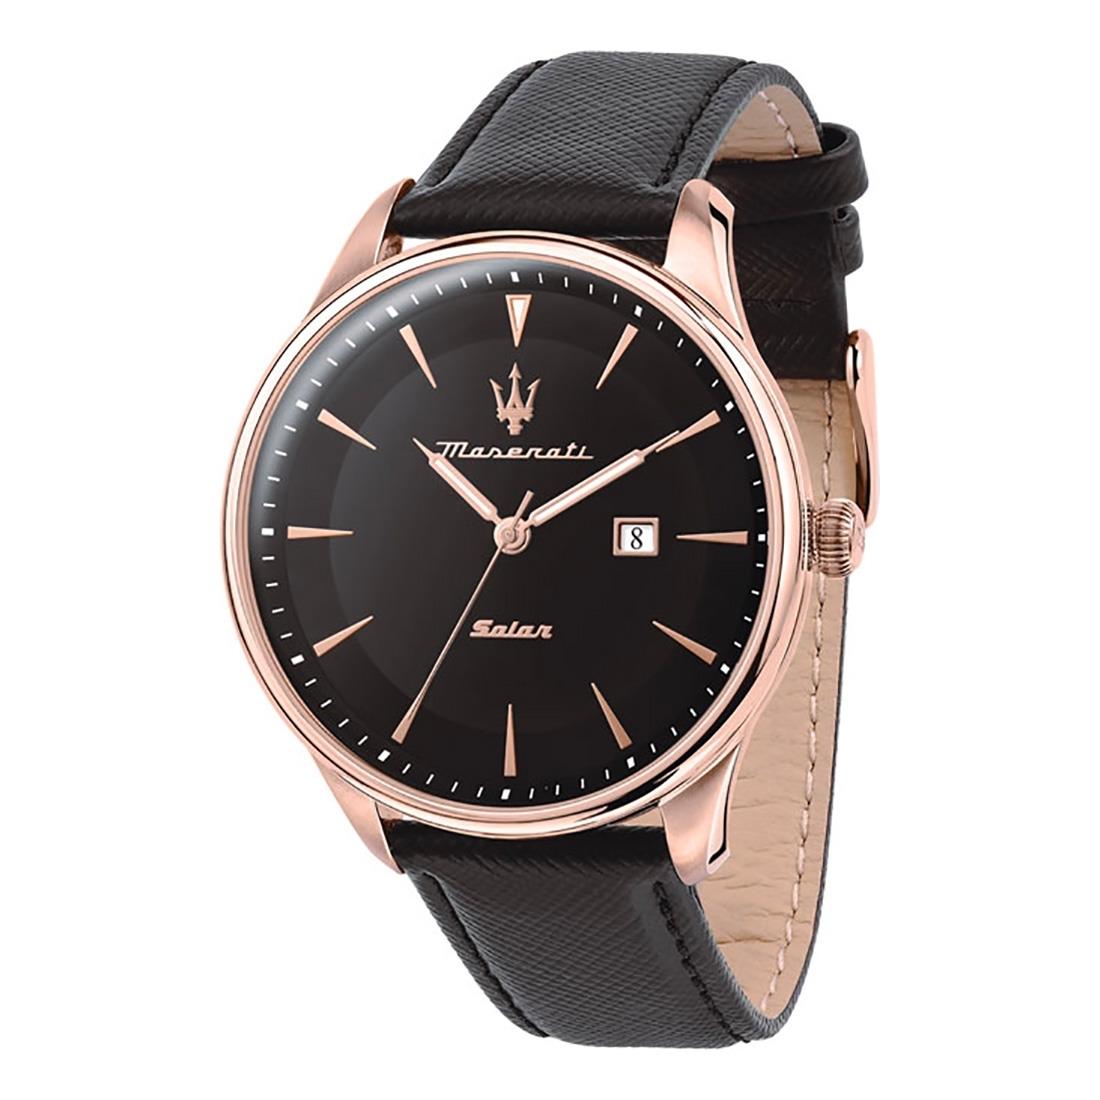 Men's watch in stainless steel with rose gold IP treatment, 45mm case - MASERATI